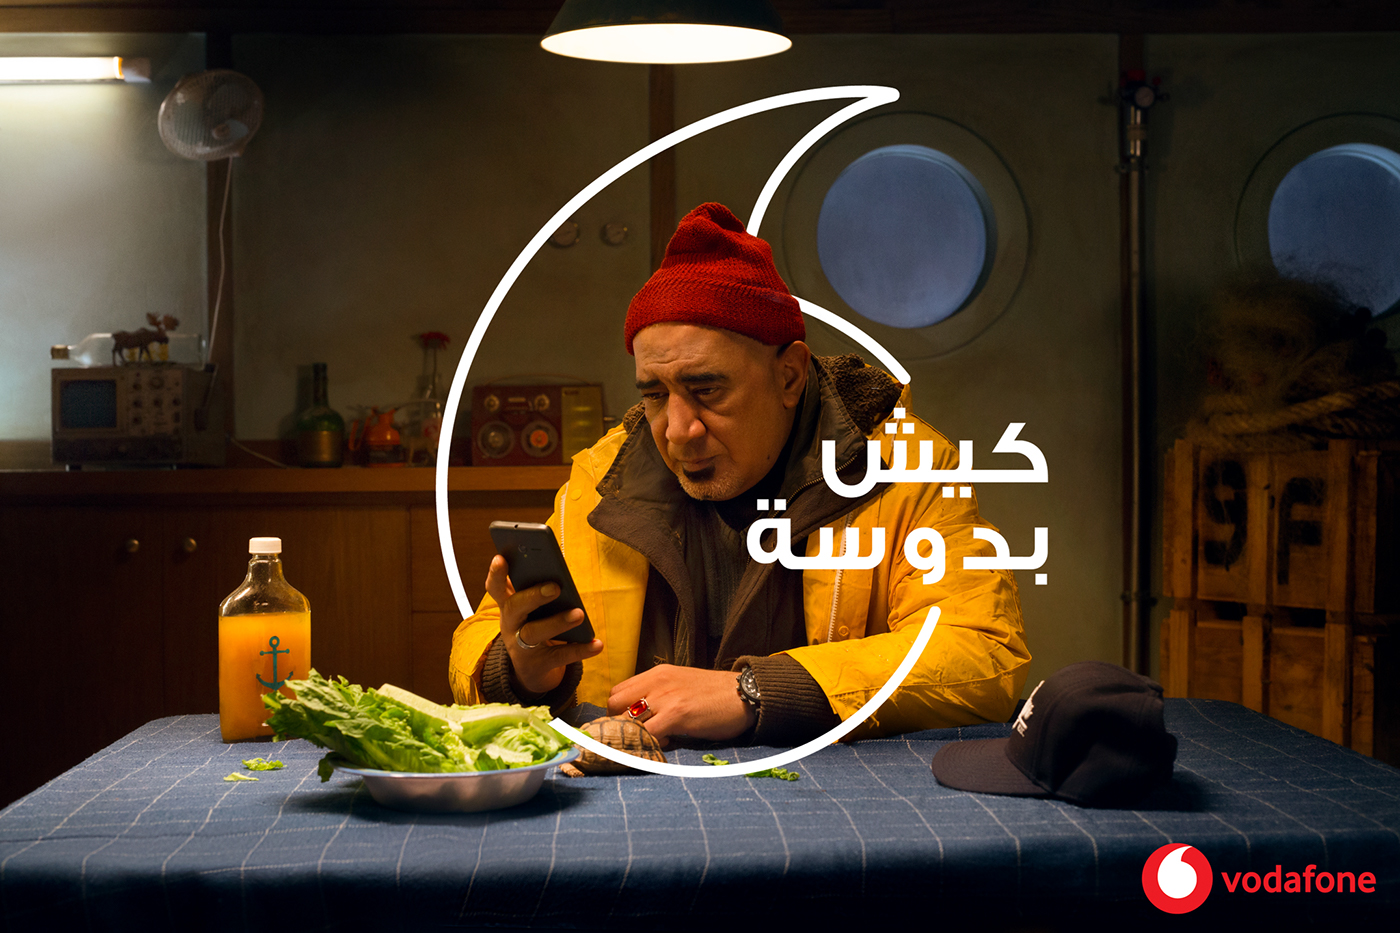 vodafone retouch colors red commercial visual Advertising 